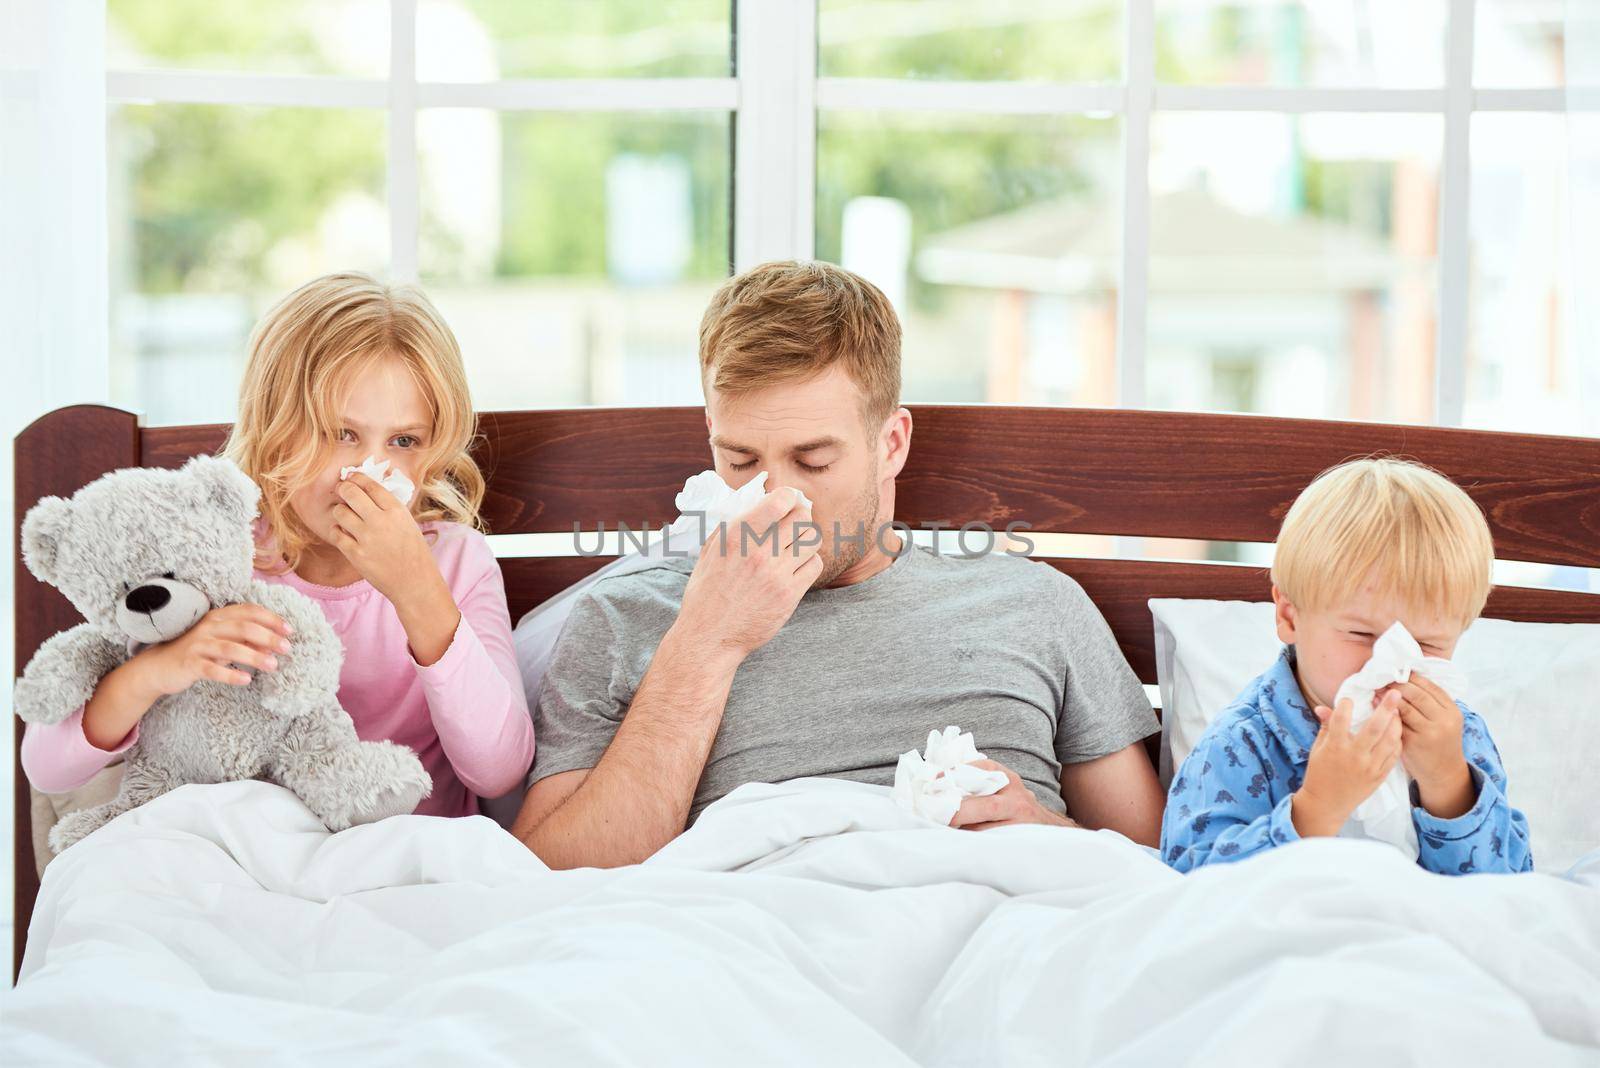 Disease. Young father and his children suffering from flu or cold and wiping their noses while lying in bed together by friendsstock